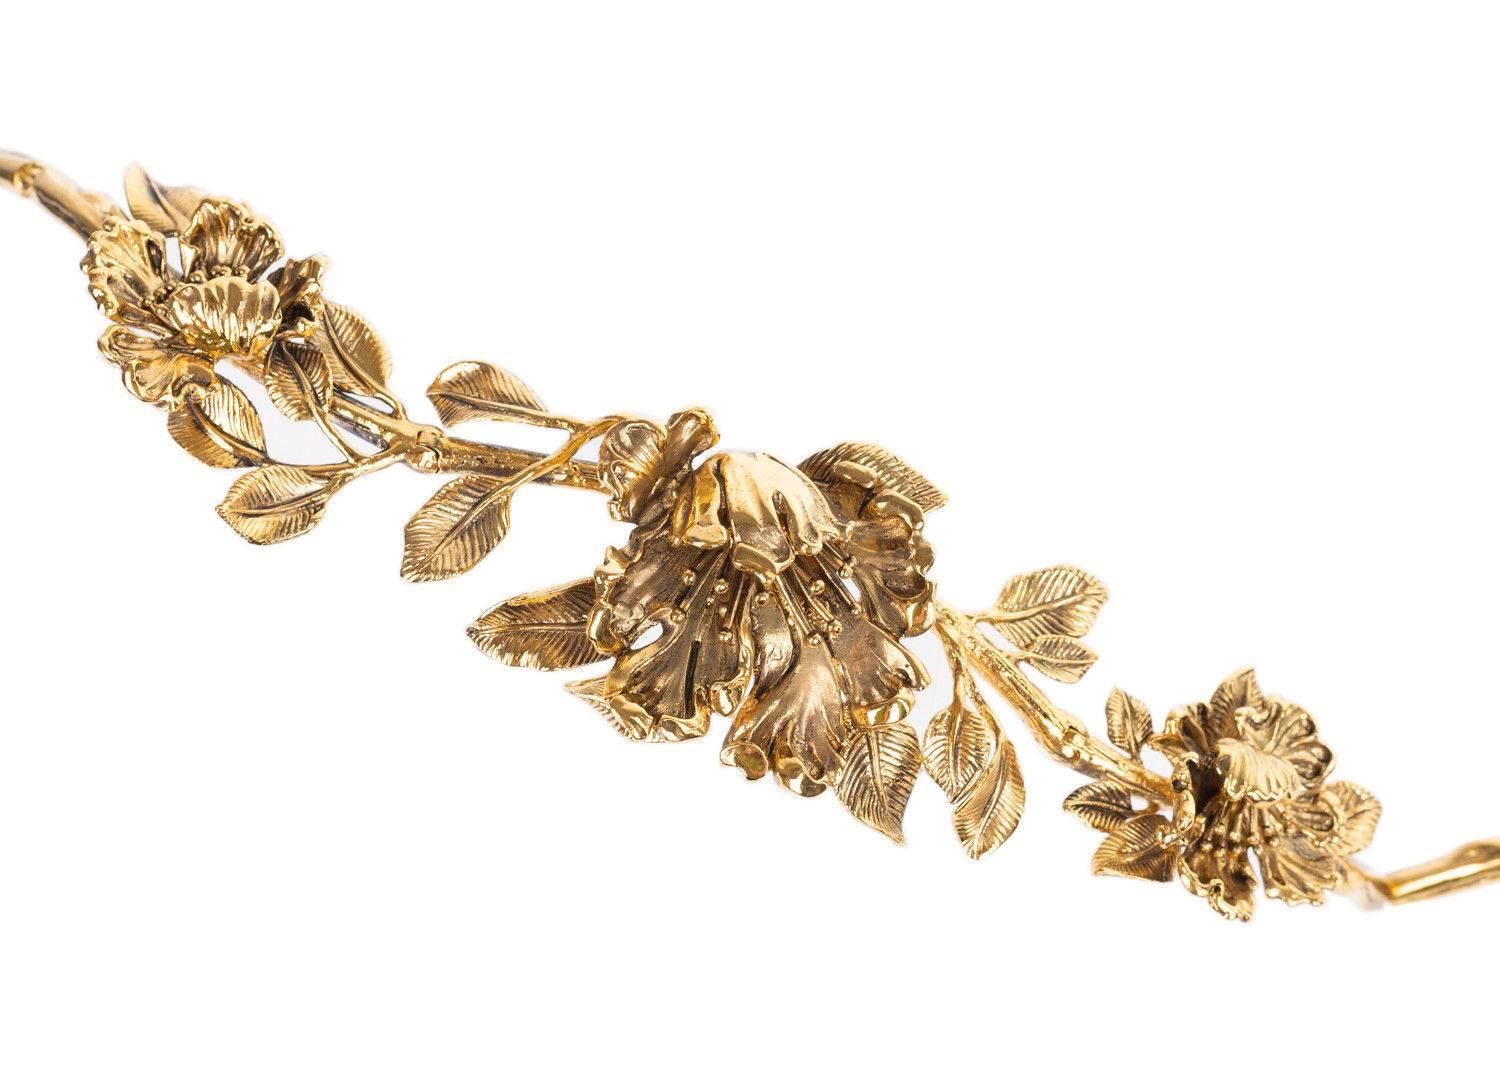 Roberto Cavalli blossom design in a gold plated finish with a lobster clasp fastening. This gold plated belt can be worn as a waist belt for a pop in your look. Pair it with high waisted jeans a white blouse and this gold blossom belt for a chic